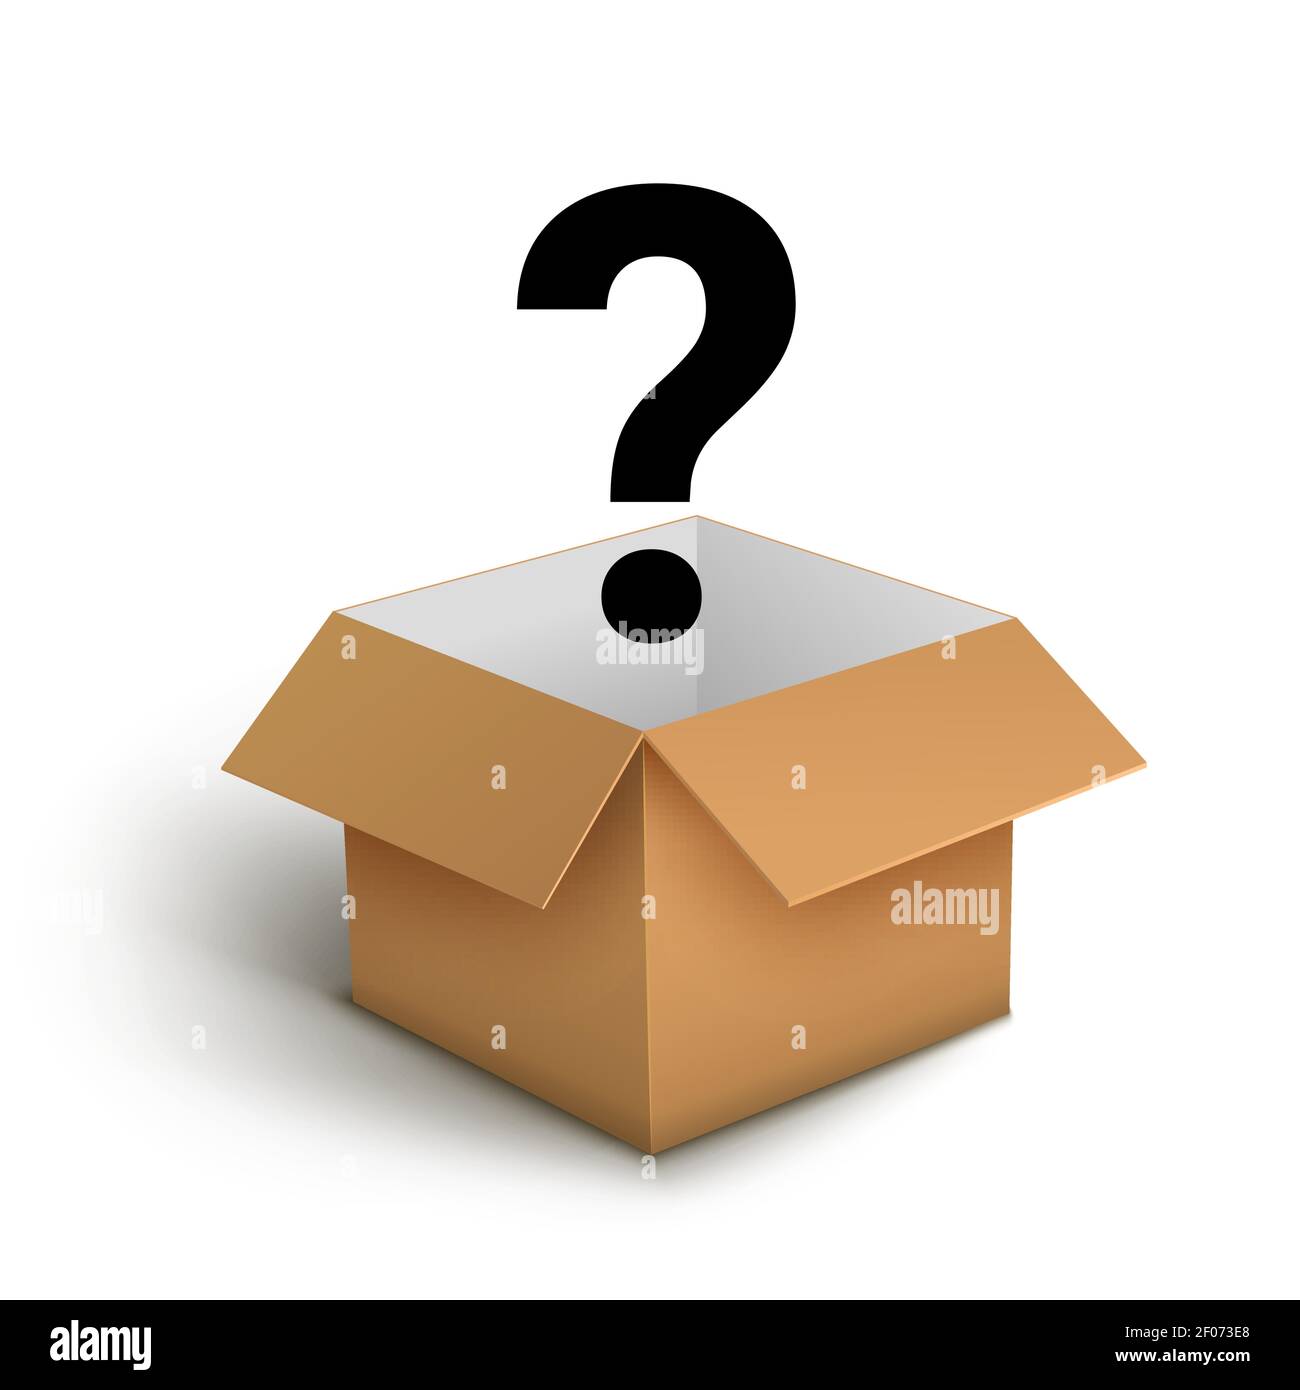 Closed box question mark Cut Out Stock Images & Pictures - Alamy